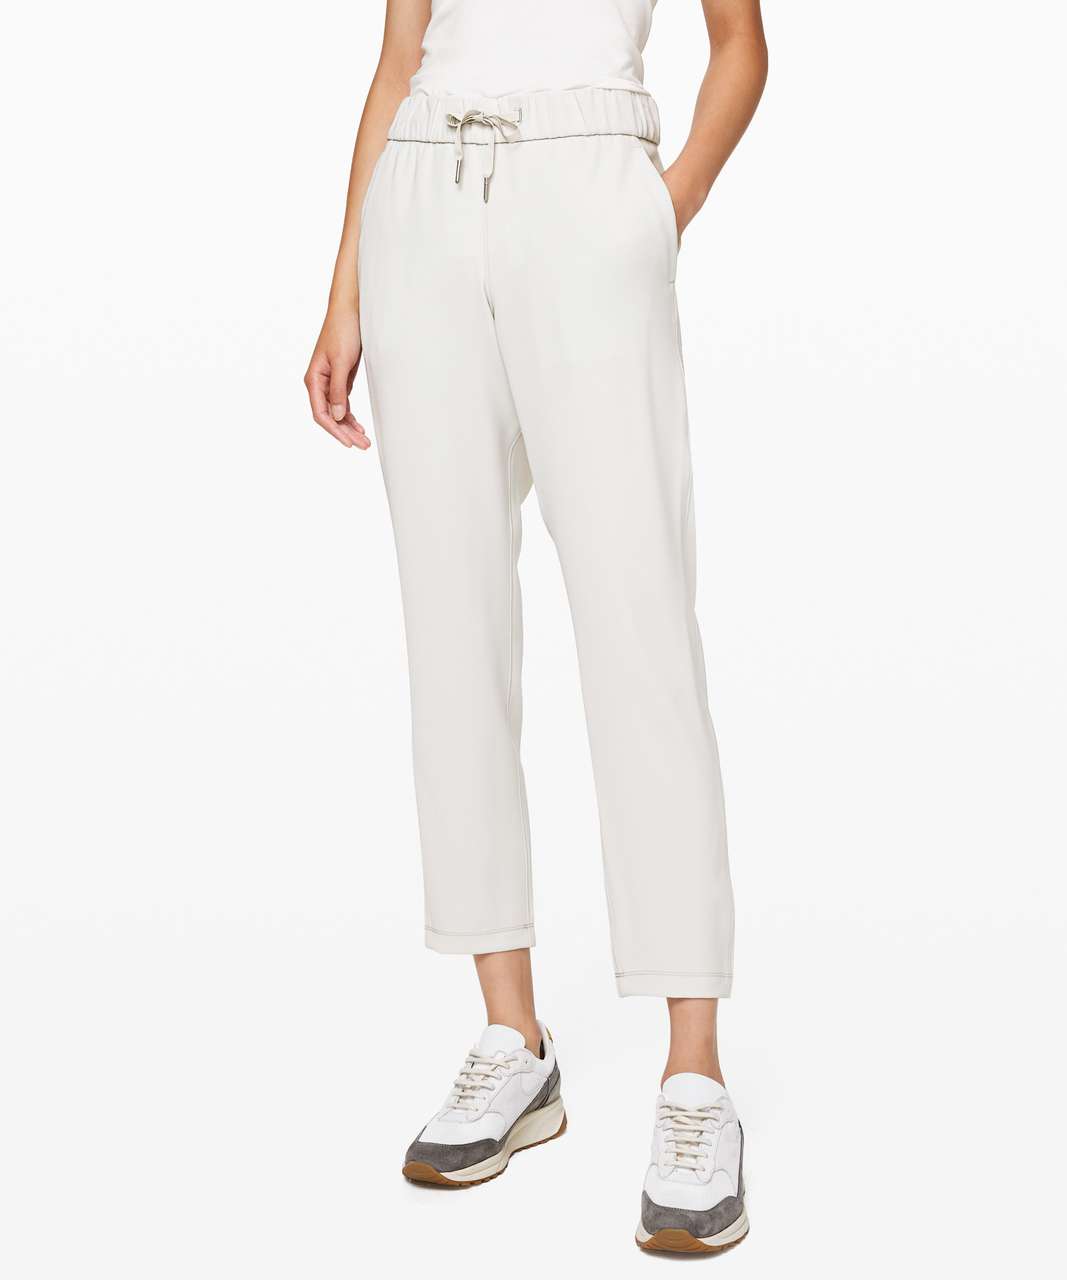 Lululemon On the Fly 7/8 Pant *Woven - Silverstone